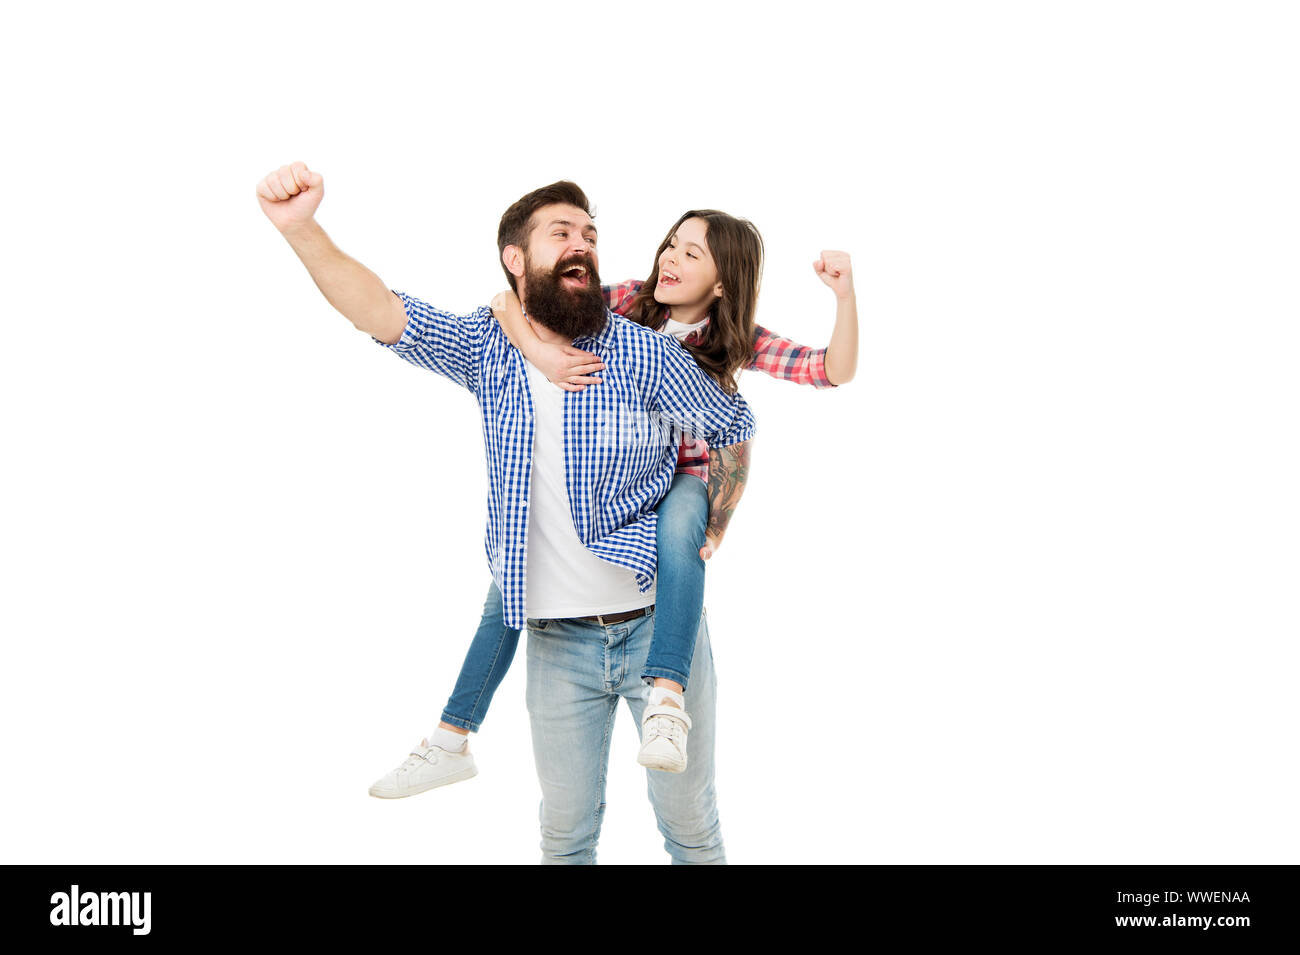 Happiness being father of girl. Holiday celebration. Active leisure. Fathers day. Father example noble human. Father little daughter. Best friends. Dad strong piggybacking adorable child. Having fun. Stock Photo